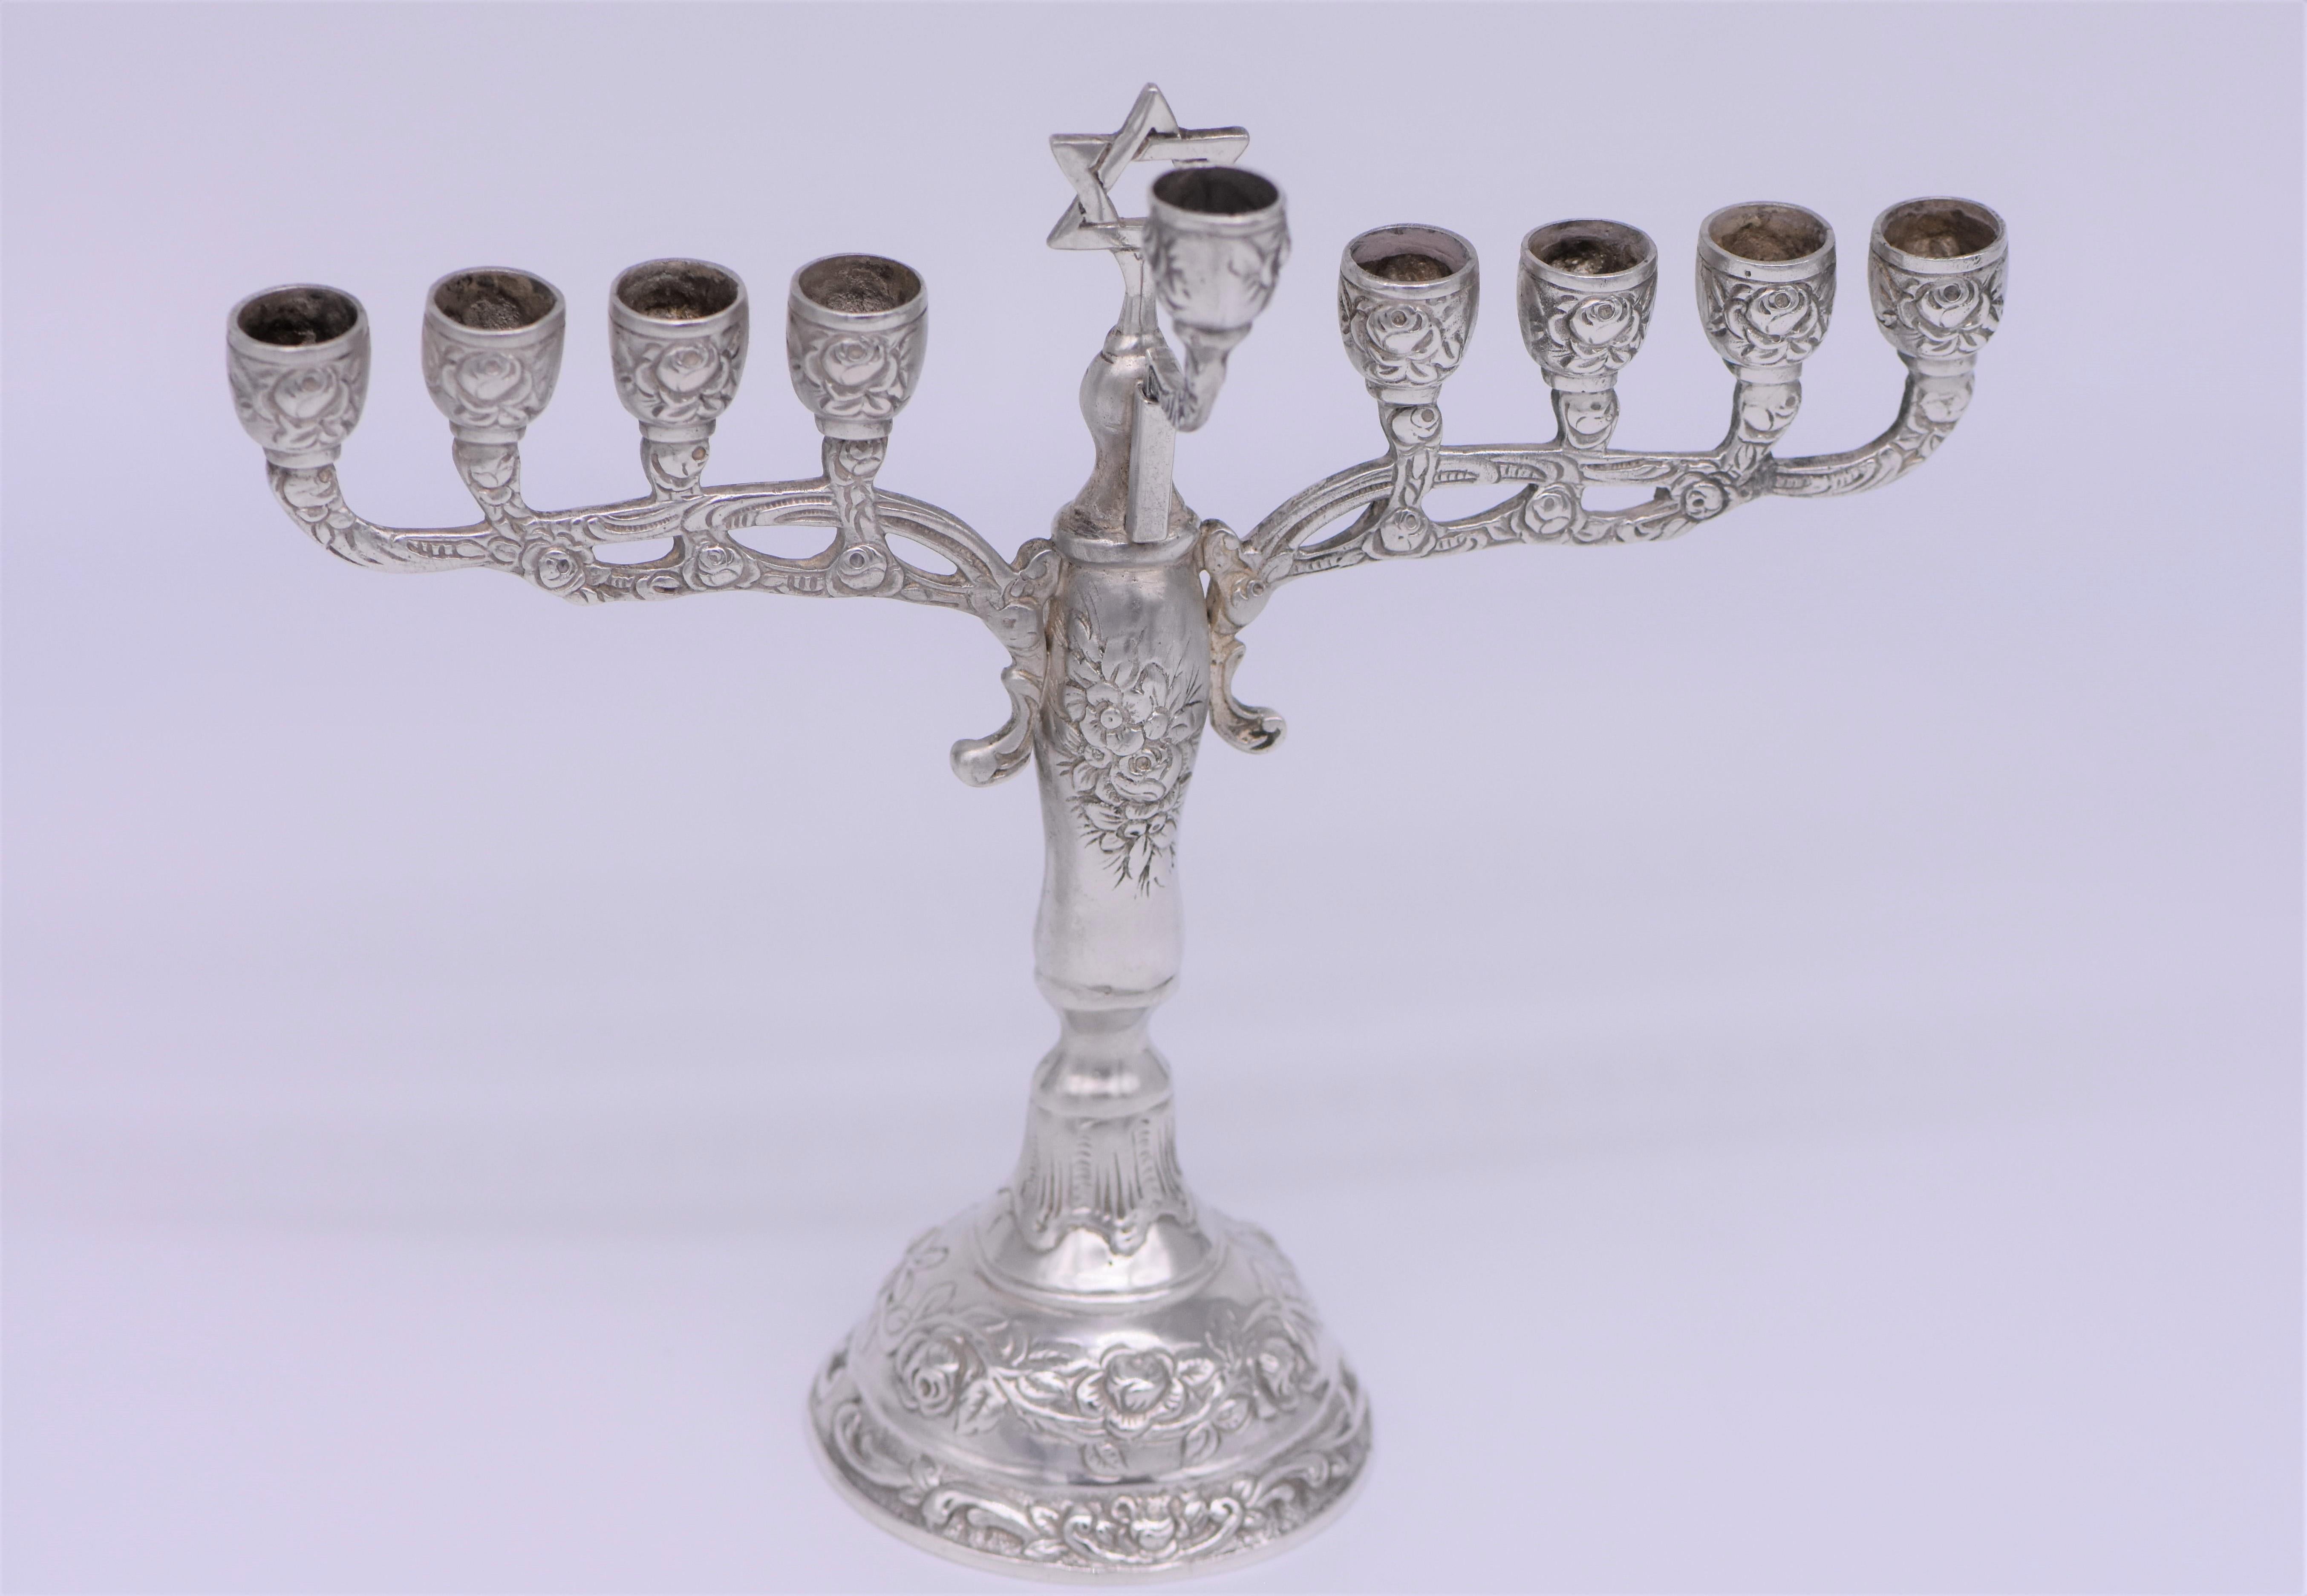 German solid silver Hanukkah lamp features nine candleholders in traditional style. These round shaped candleholders are supported by tiers of intricately carved, decorative flower motifs. Transitions of stylistic ornamentation seemingly branch-like